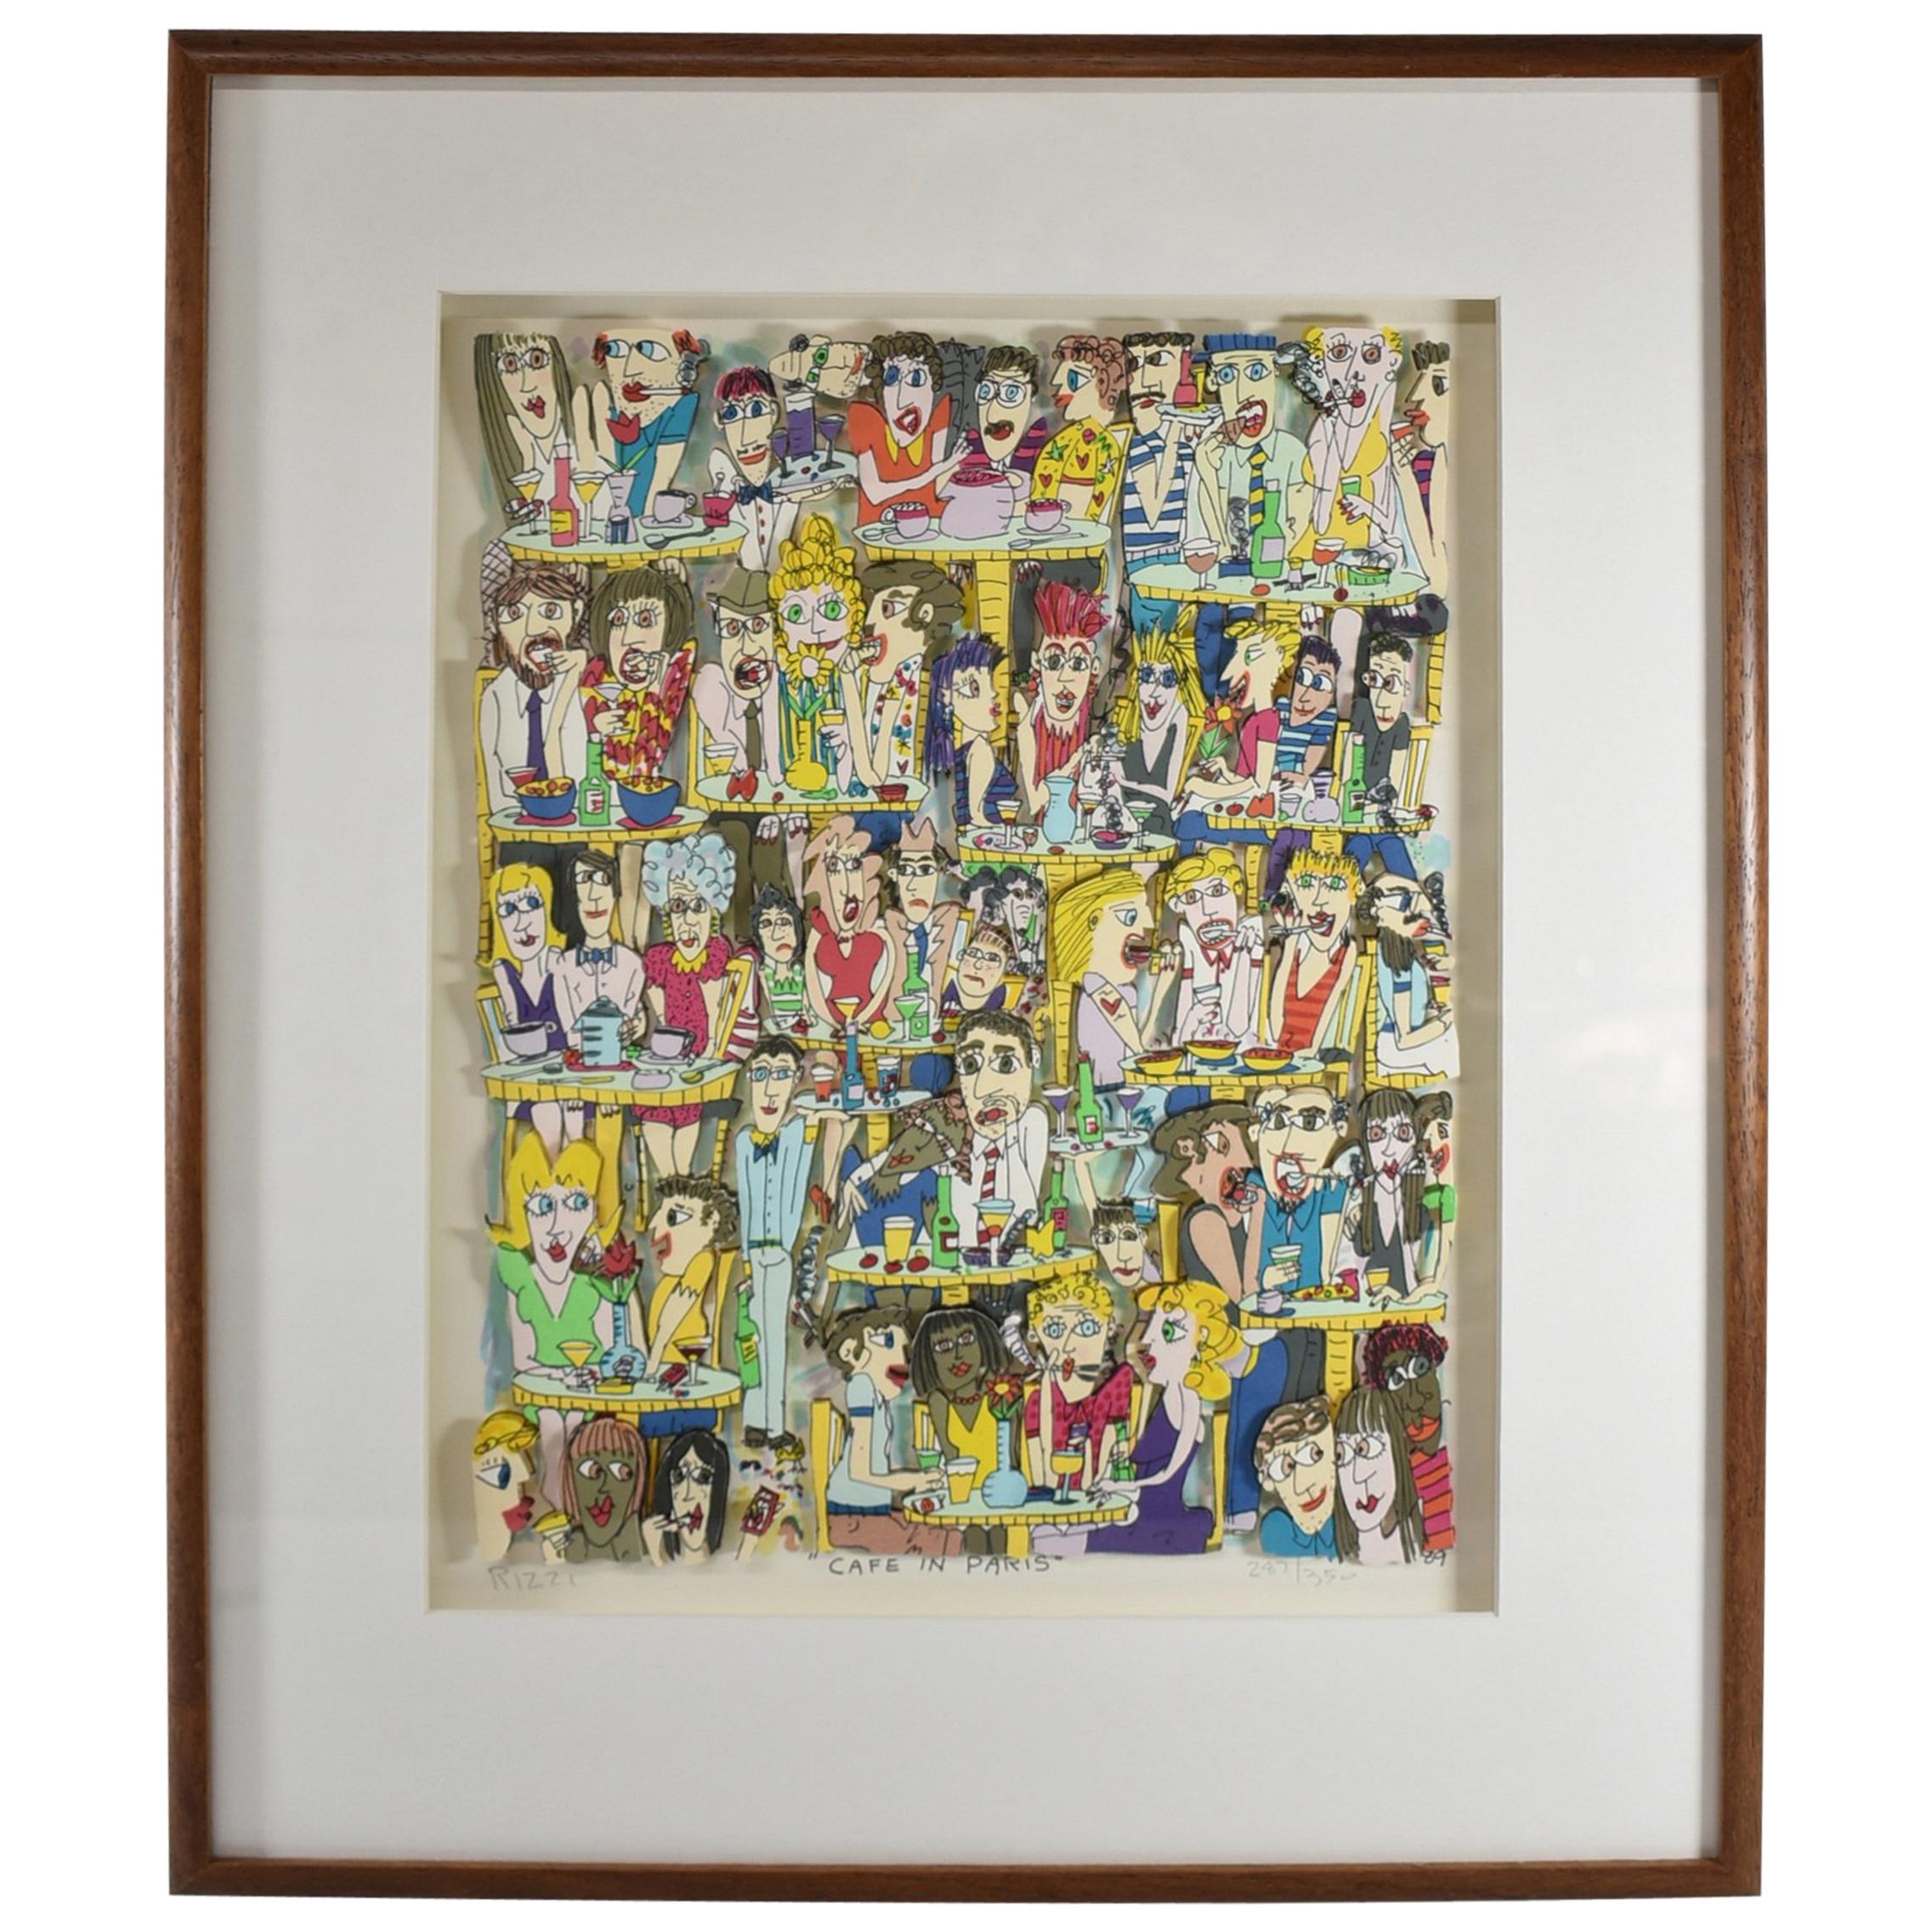 James Rizzi 3-D Lithograph "Cafe in Paris" Framed